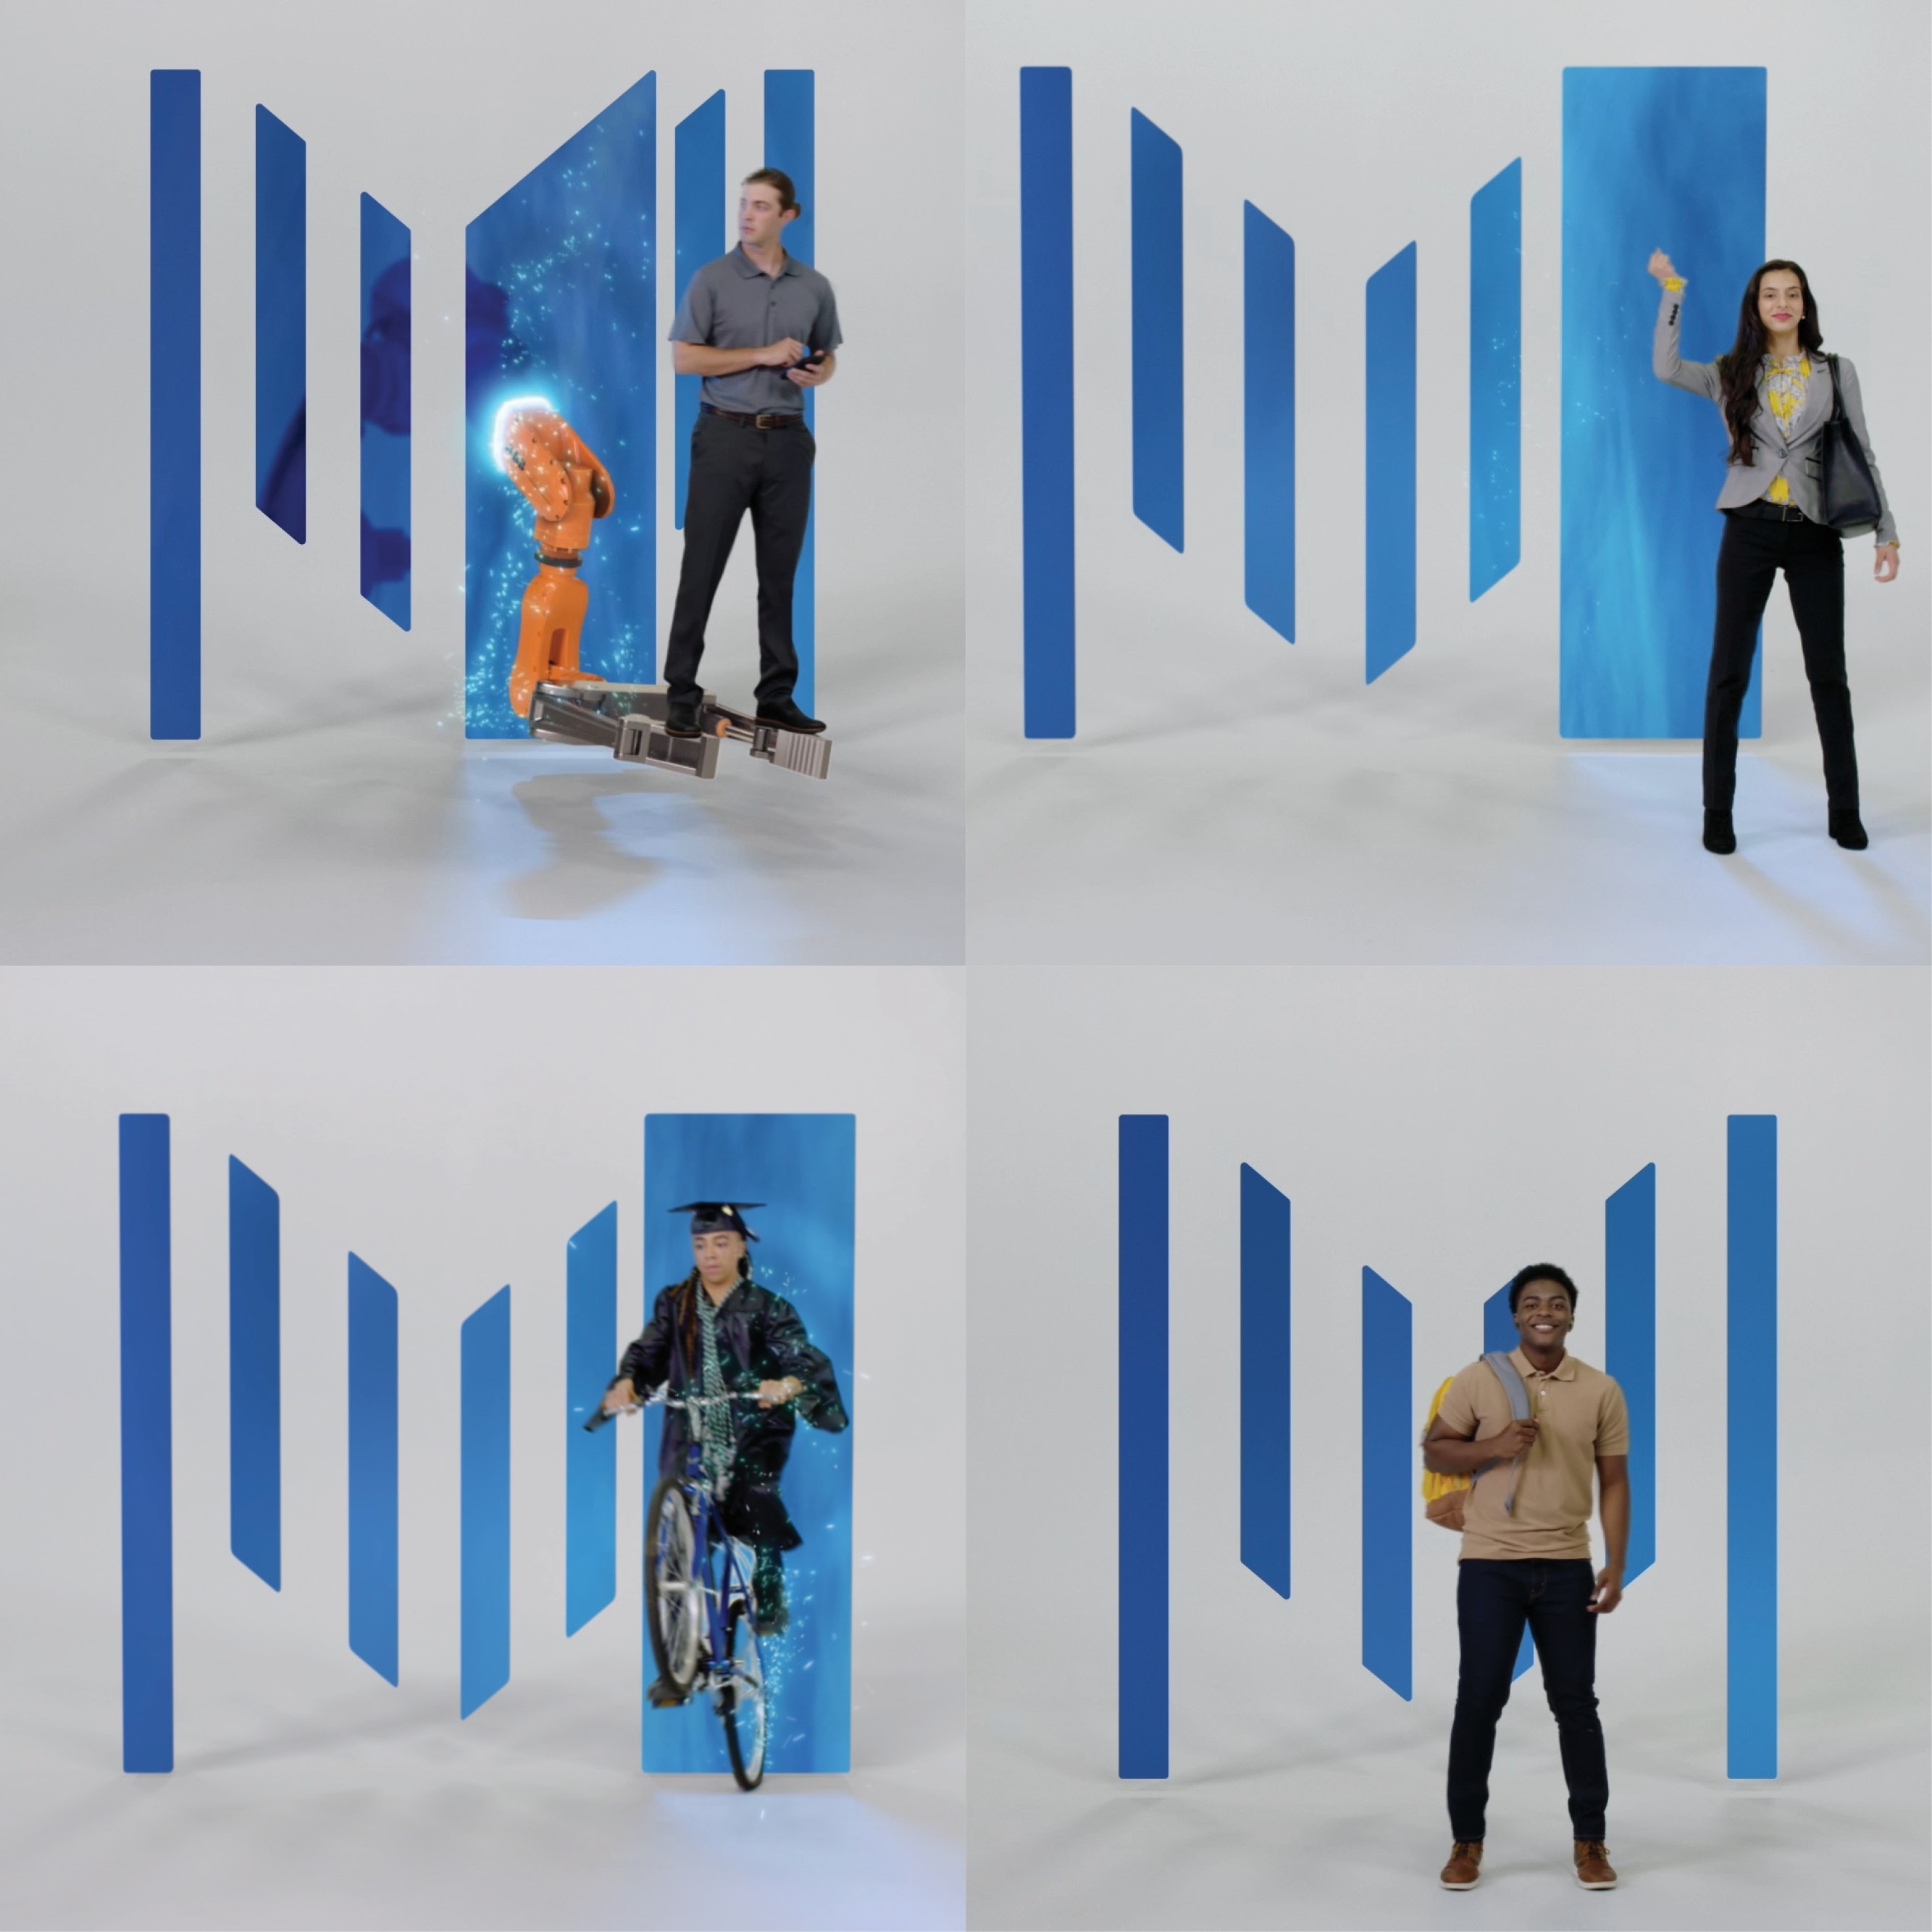 Four still images of students jumping out of the M from Midlands Tech logo.